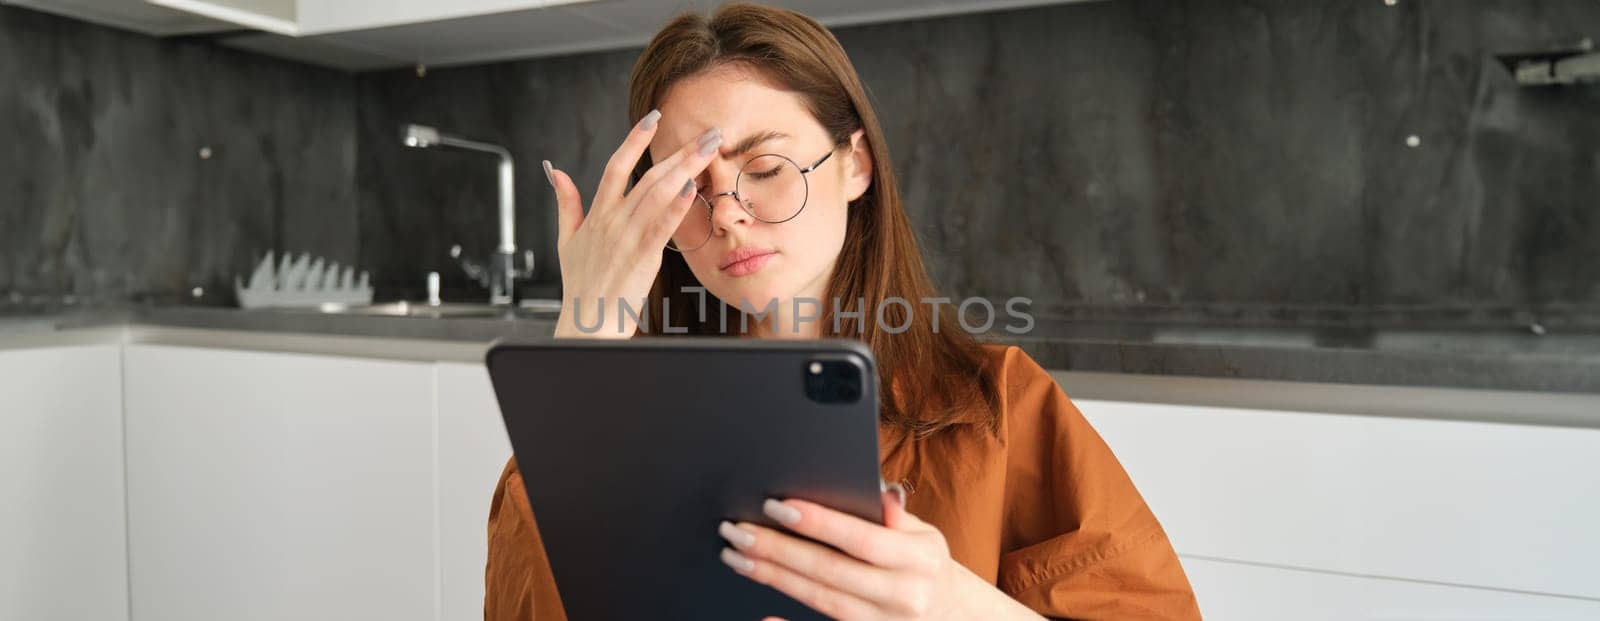 Portrait of young woman feeling unwell, touching head, has headache or migraine, reading on digital tablet in glasses.